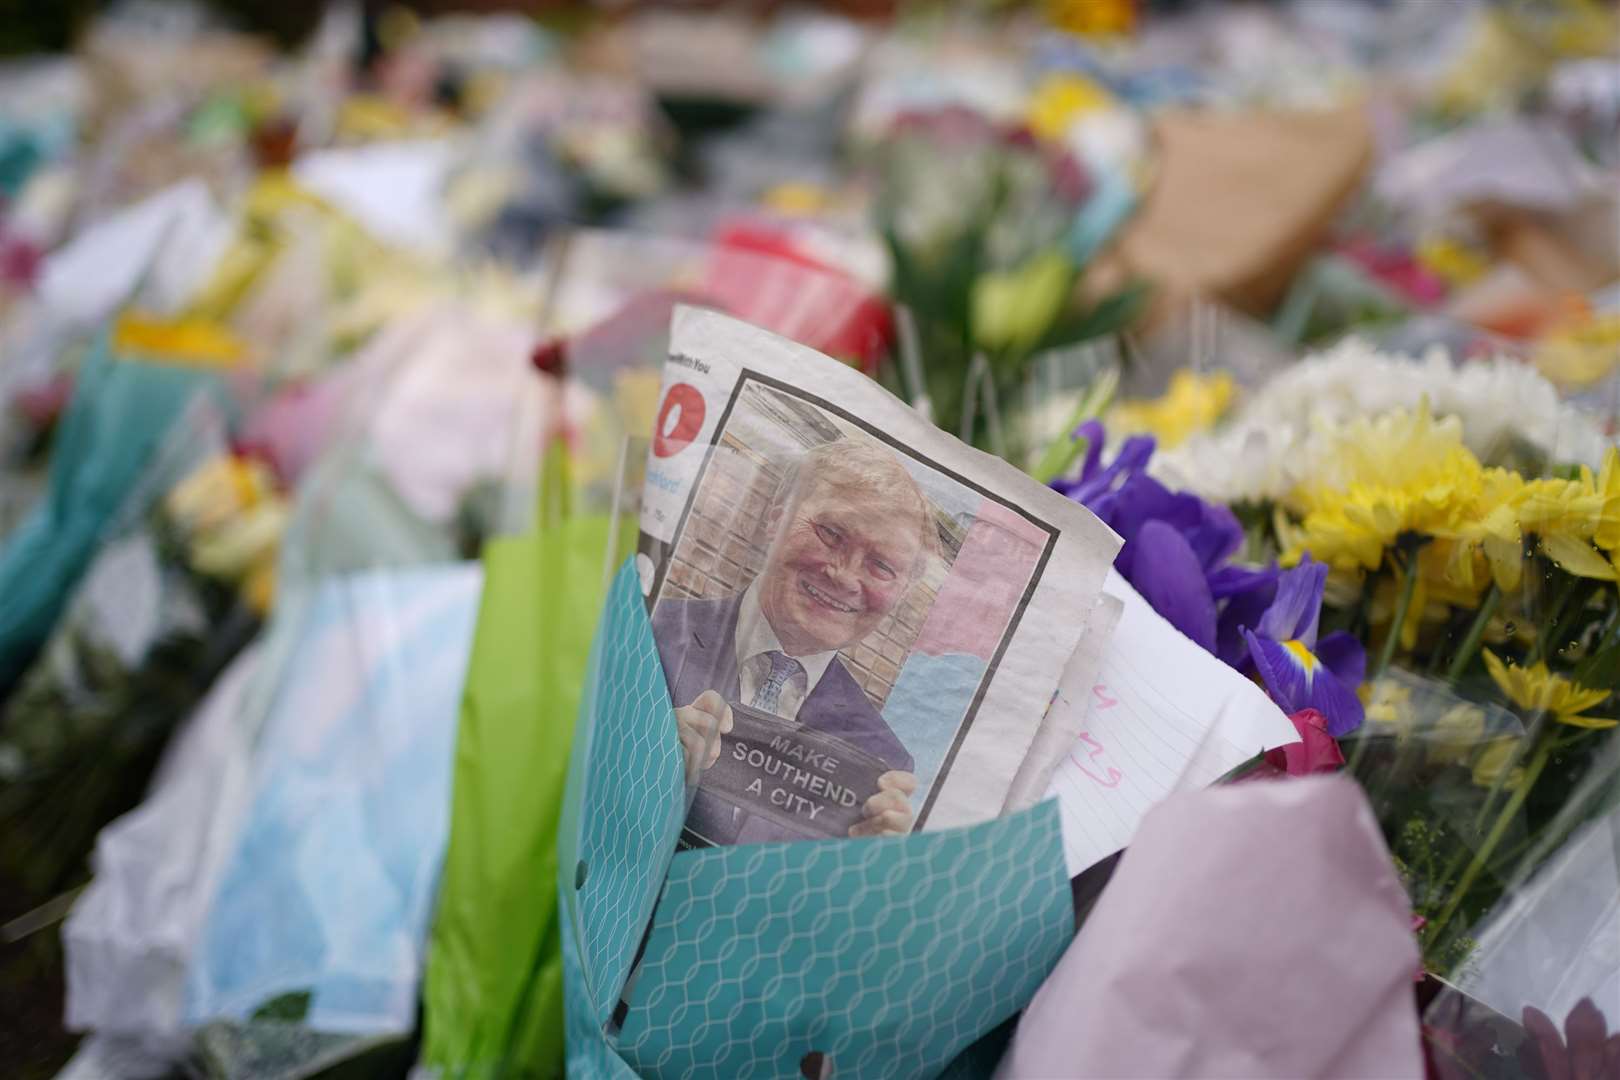 An edition of the Southend Echo tucked into one of the floral tributes left outside the Belfairs Methodist Church in Leigh-on-Sea, Essex, where Conservative MP Sir David Amess was killed on Friday.